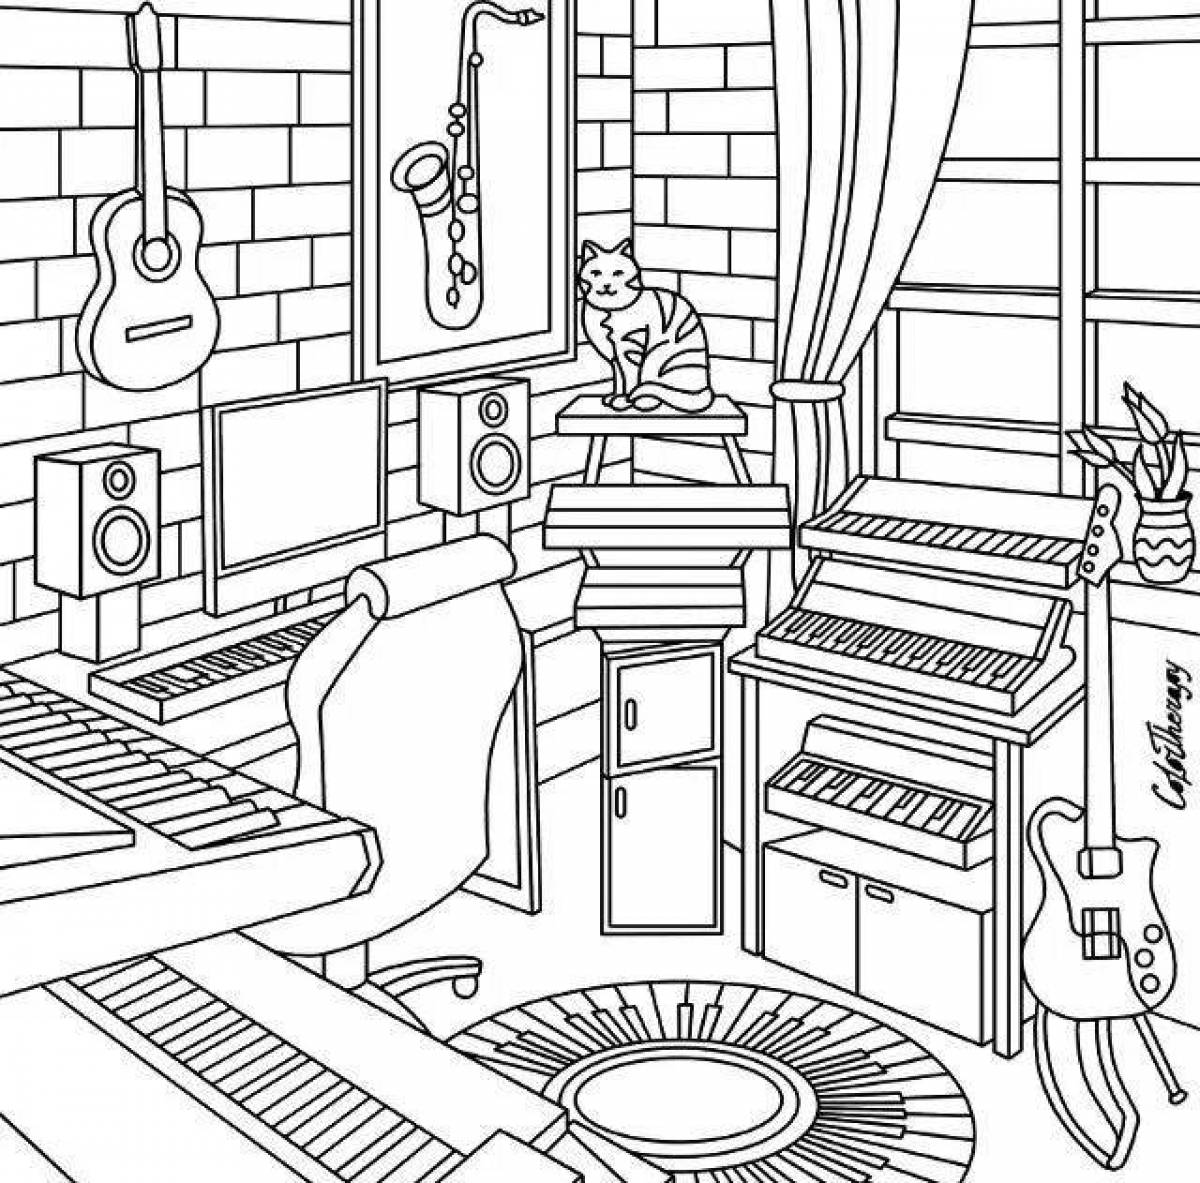 Majestic girl's room coloring page